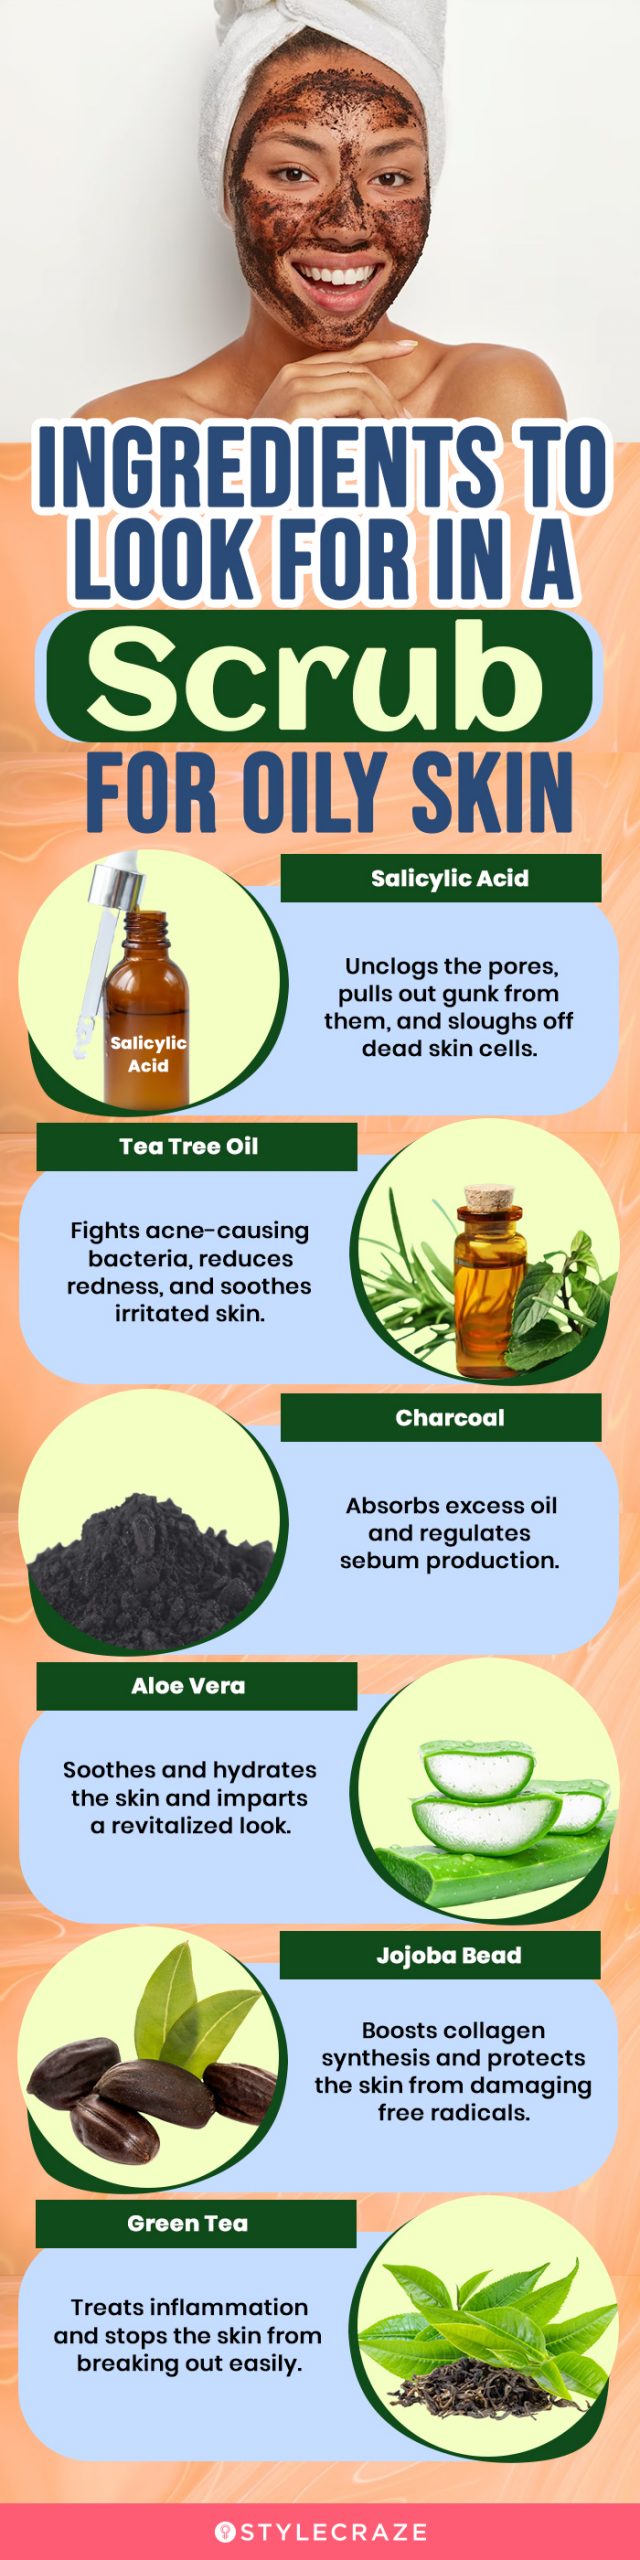 Ingredients To Look In A Scrub For Oily Skin(infographic)